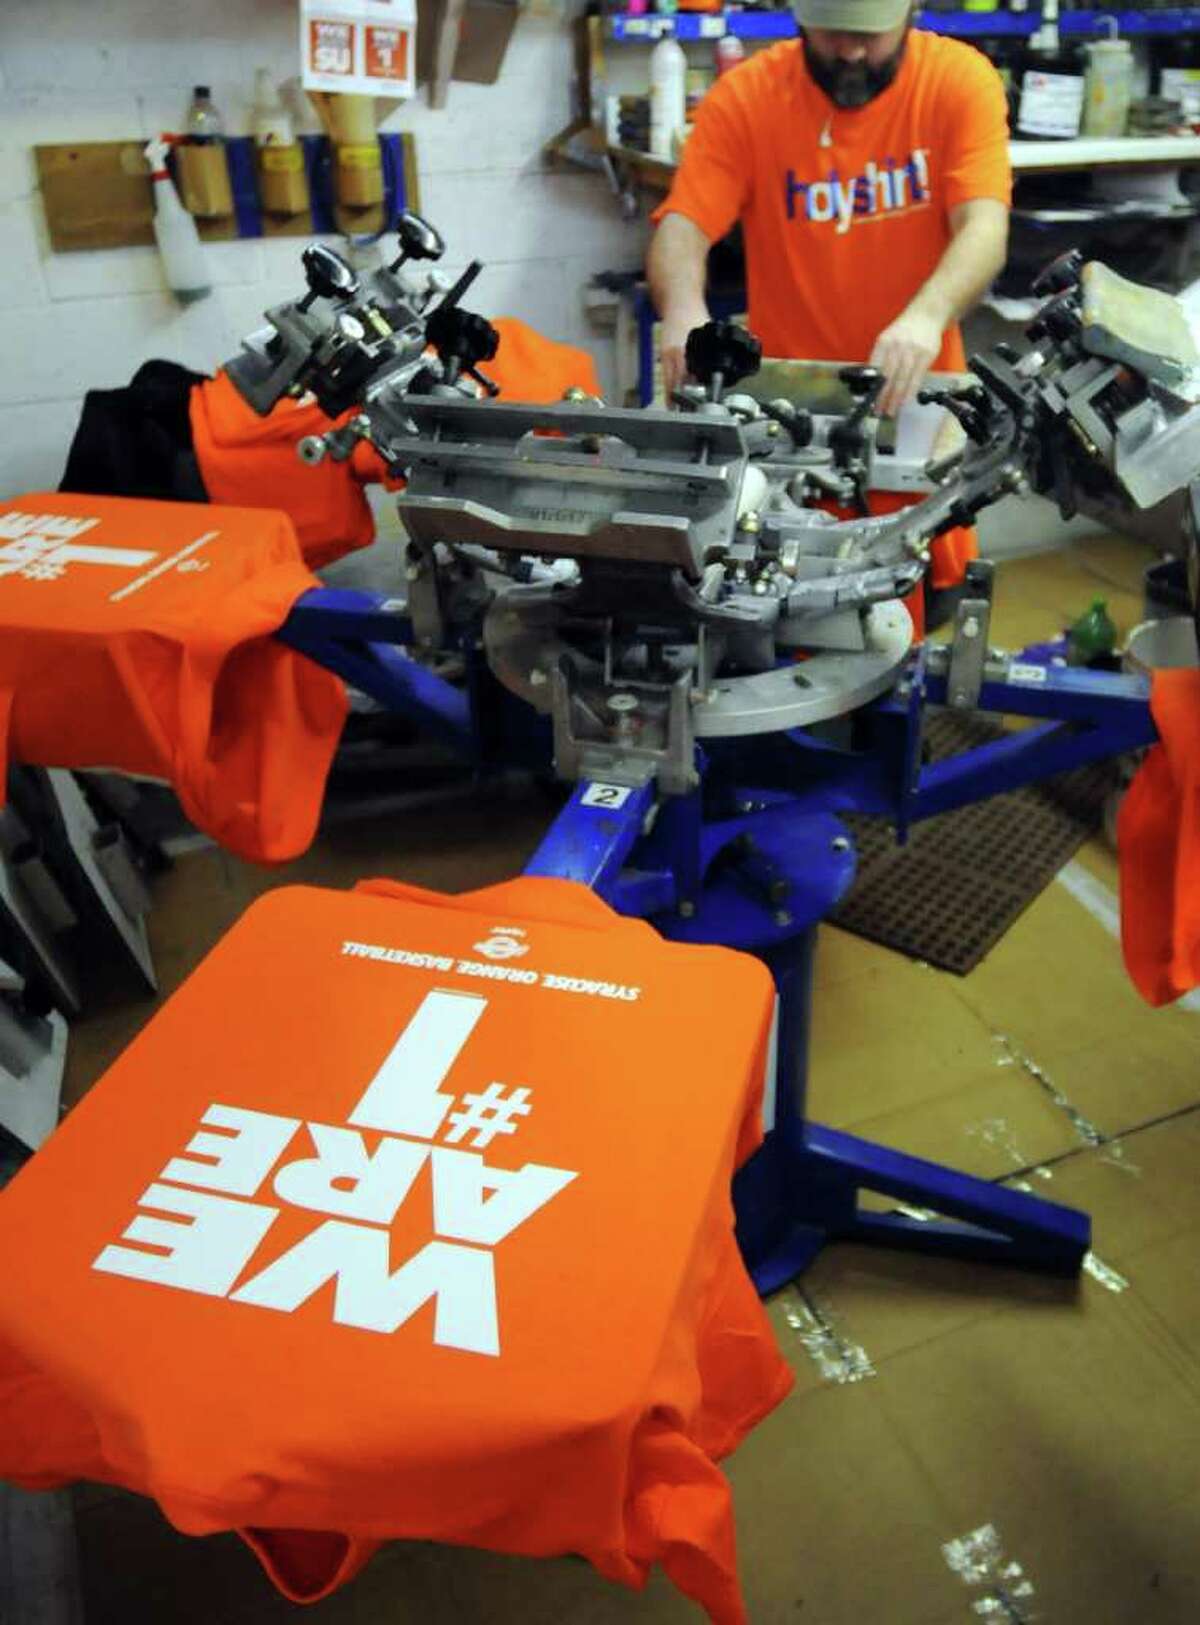 Drew Delfavero, a printer for Holy Shirt!, makes shirts that say "We Are #1" at their shop in Syracuse , N.Y., Monday, Dec. 12, 2011. The shirts are to celebrate the announcement of the Syracuse basketball team being voted No. 1 in the country in The Associated Press, ESPN and USA Today Top 25 polls. The t-shirts are being printed to fill orders placed by local stores and shops.